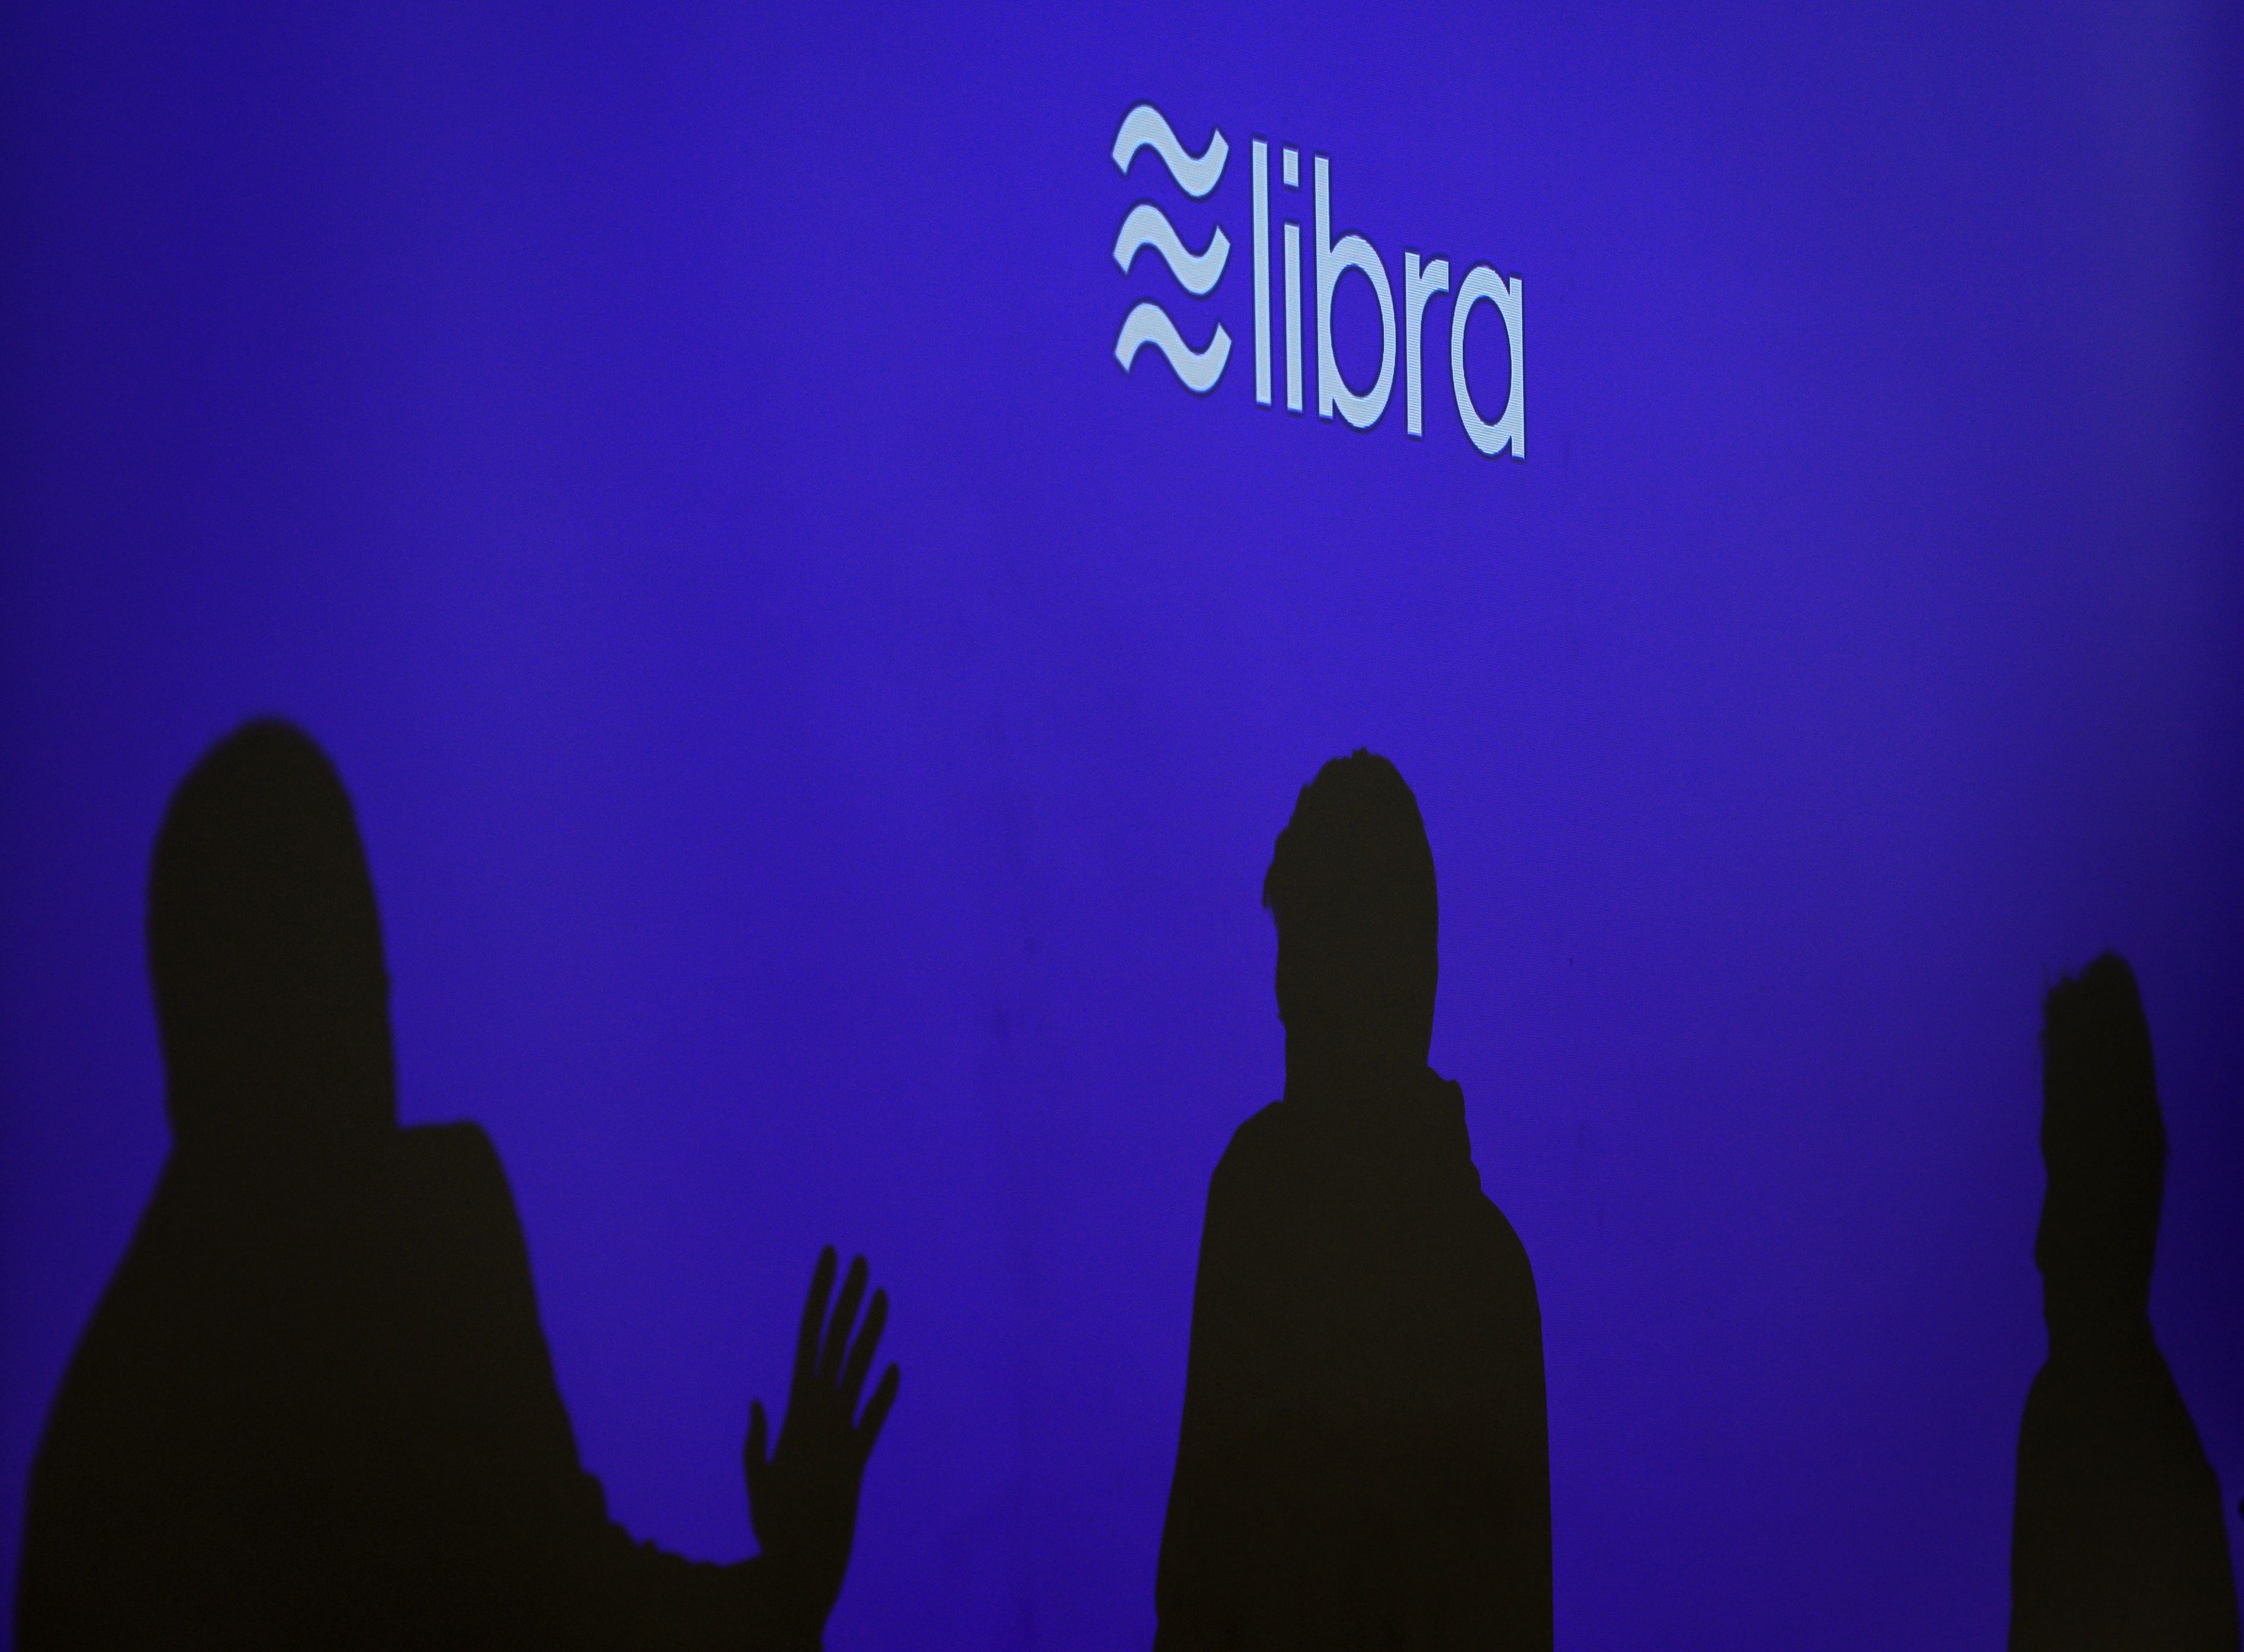  Facebook's Libra cryptocurrency. (Credit: Reuters Photo)